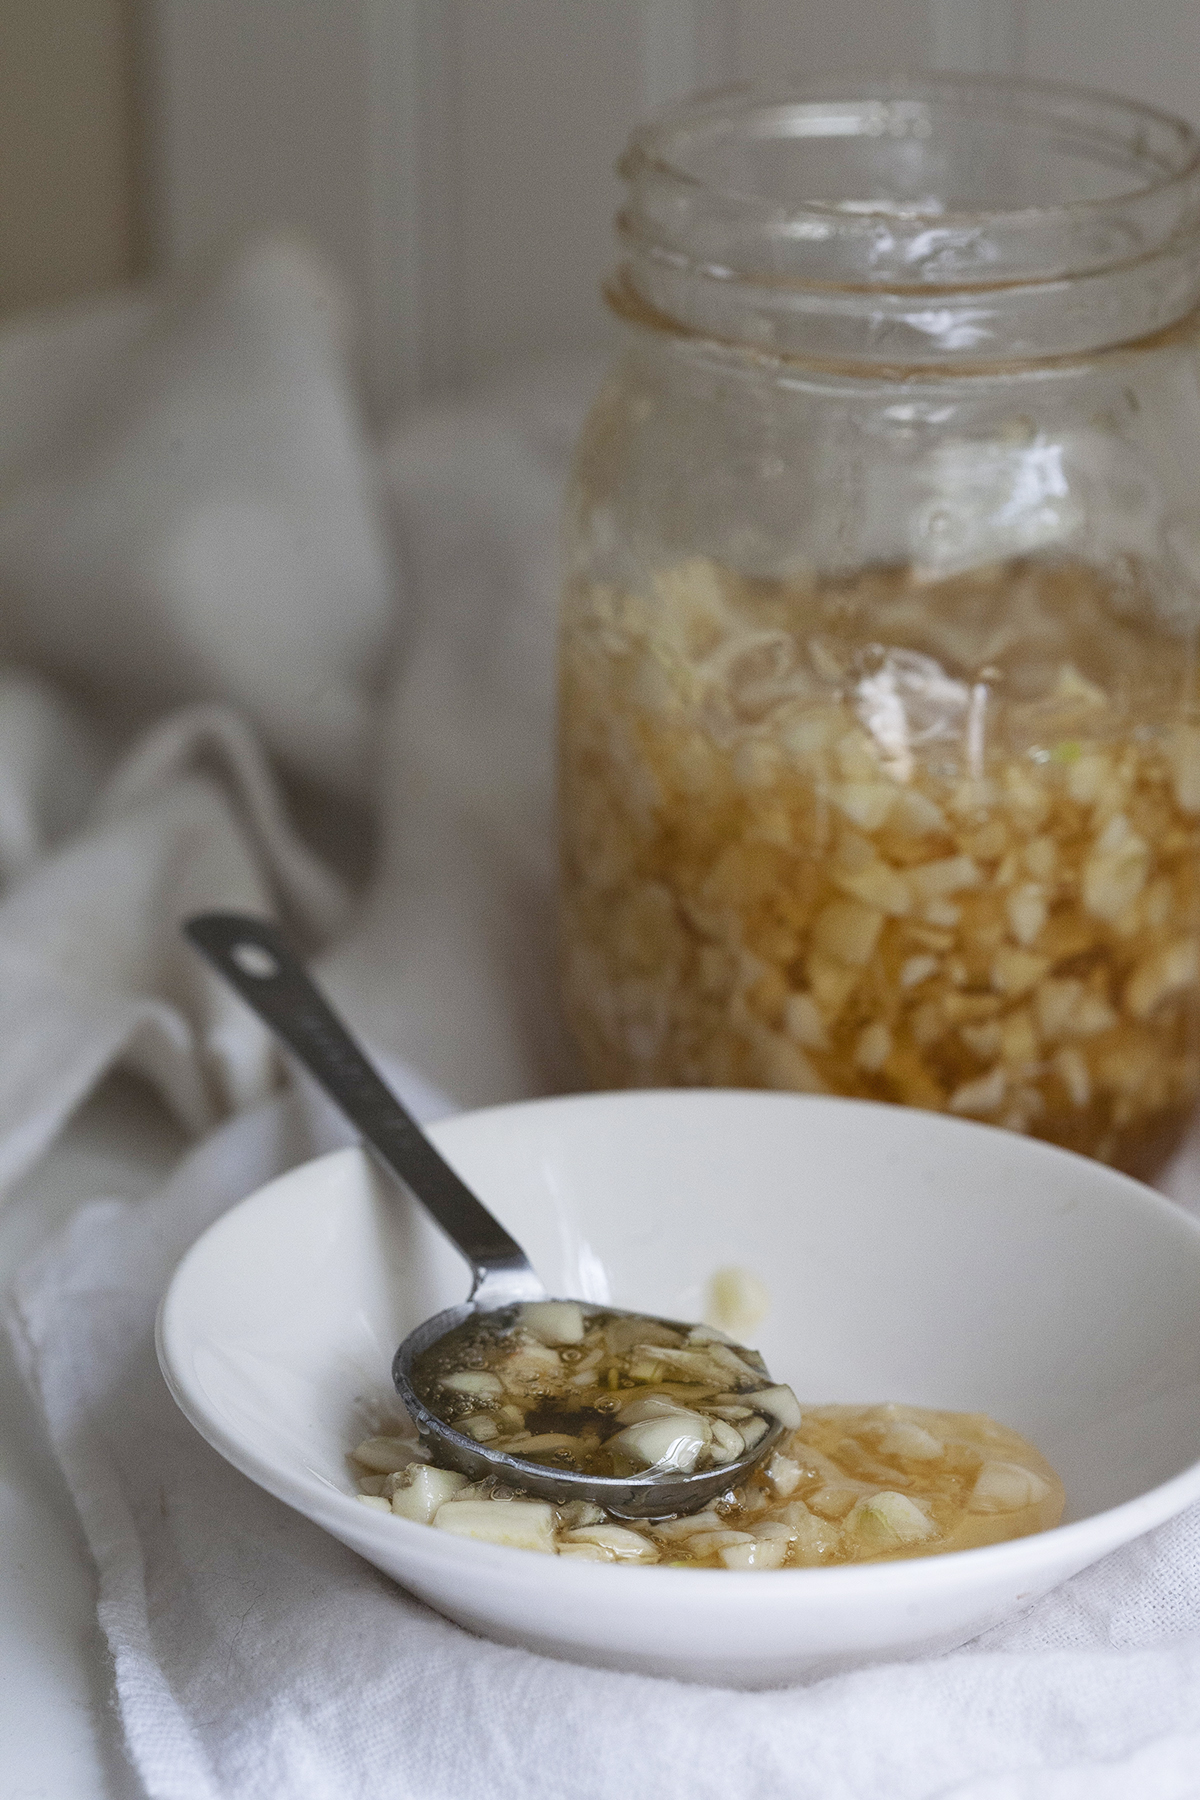 DIY Garlic Honey for For Cold & Flu Season Preparation | Herbal Academy | It’s easy to feel defenseless against unseen pathogens during cold and flu season, but having some garlic honey on hand will help you to be better prepared! 